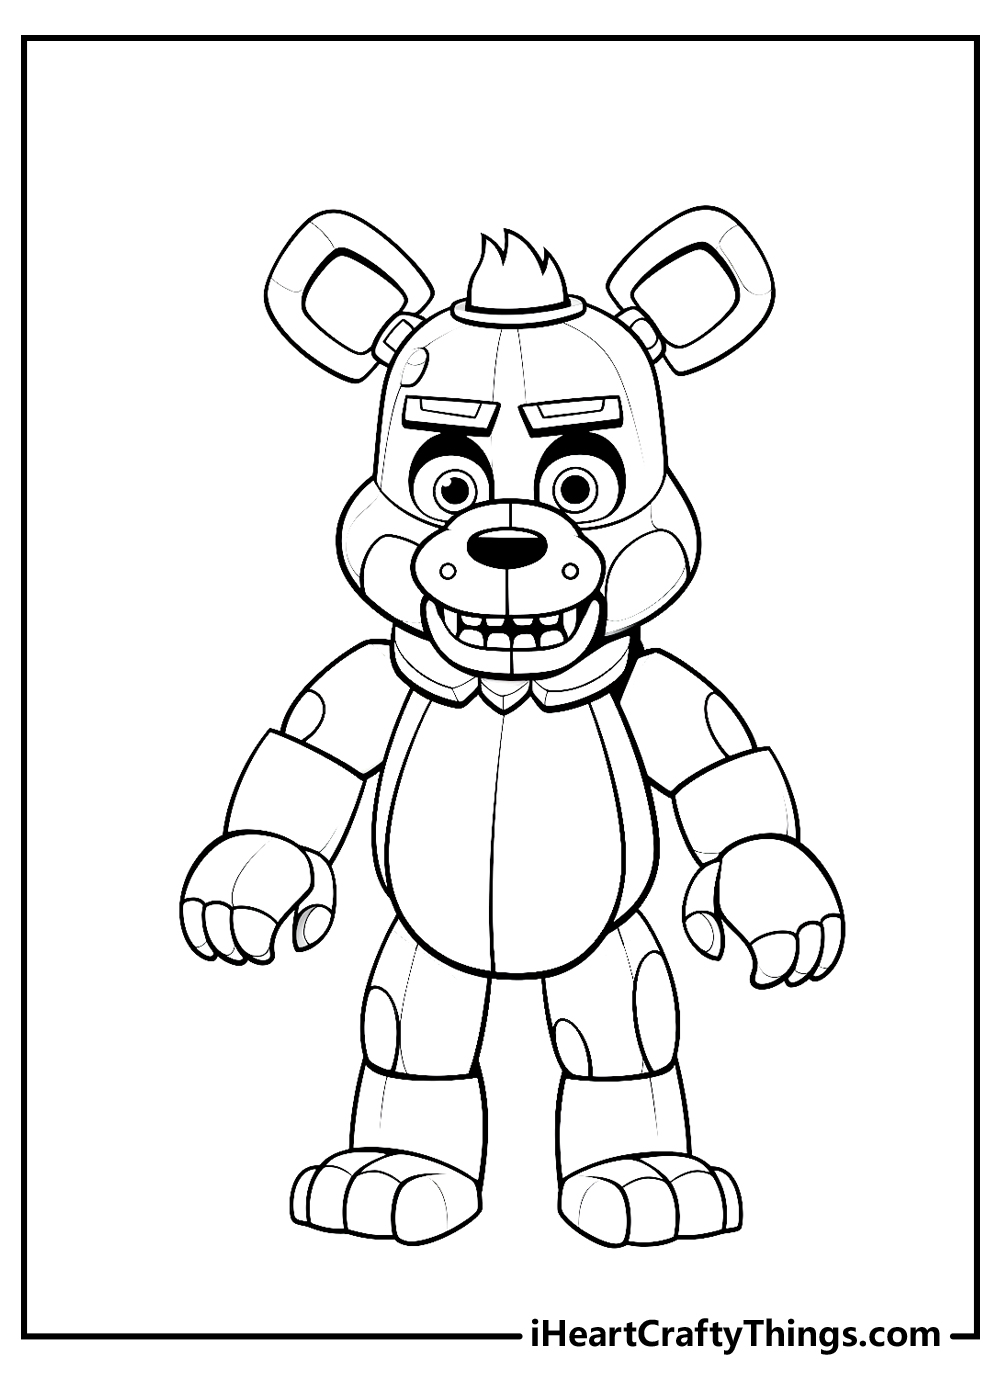 five nights at freddys coloring sheet for kids